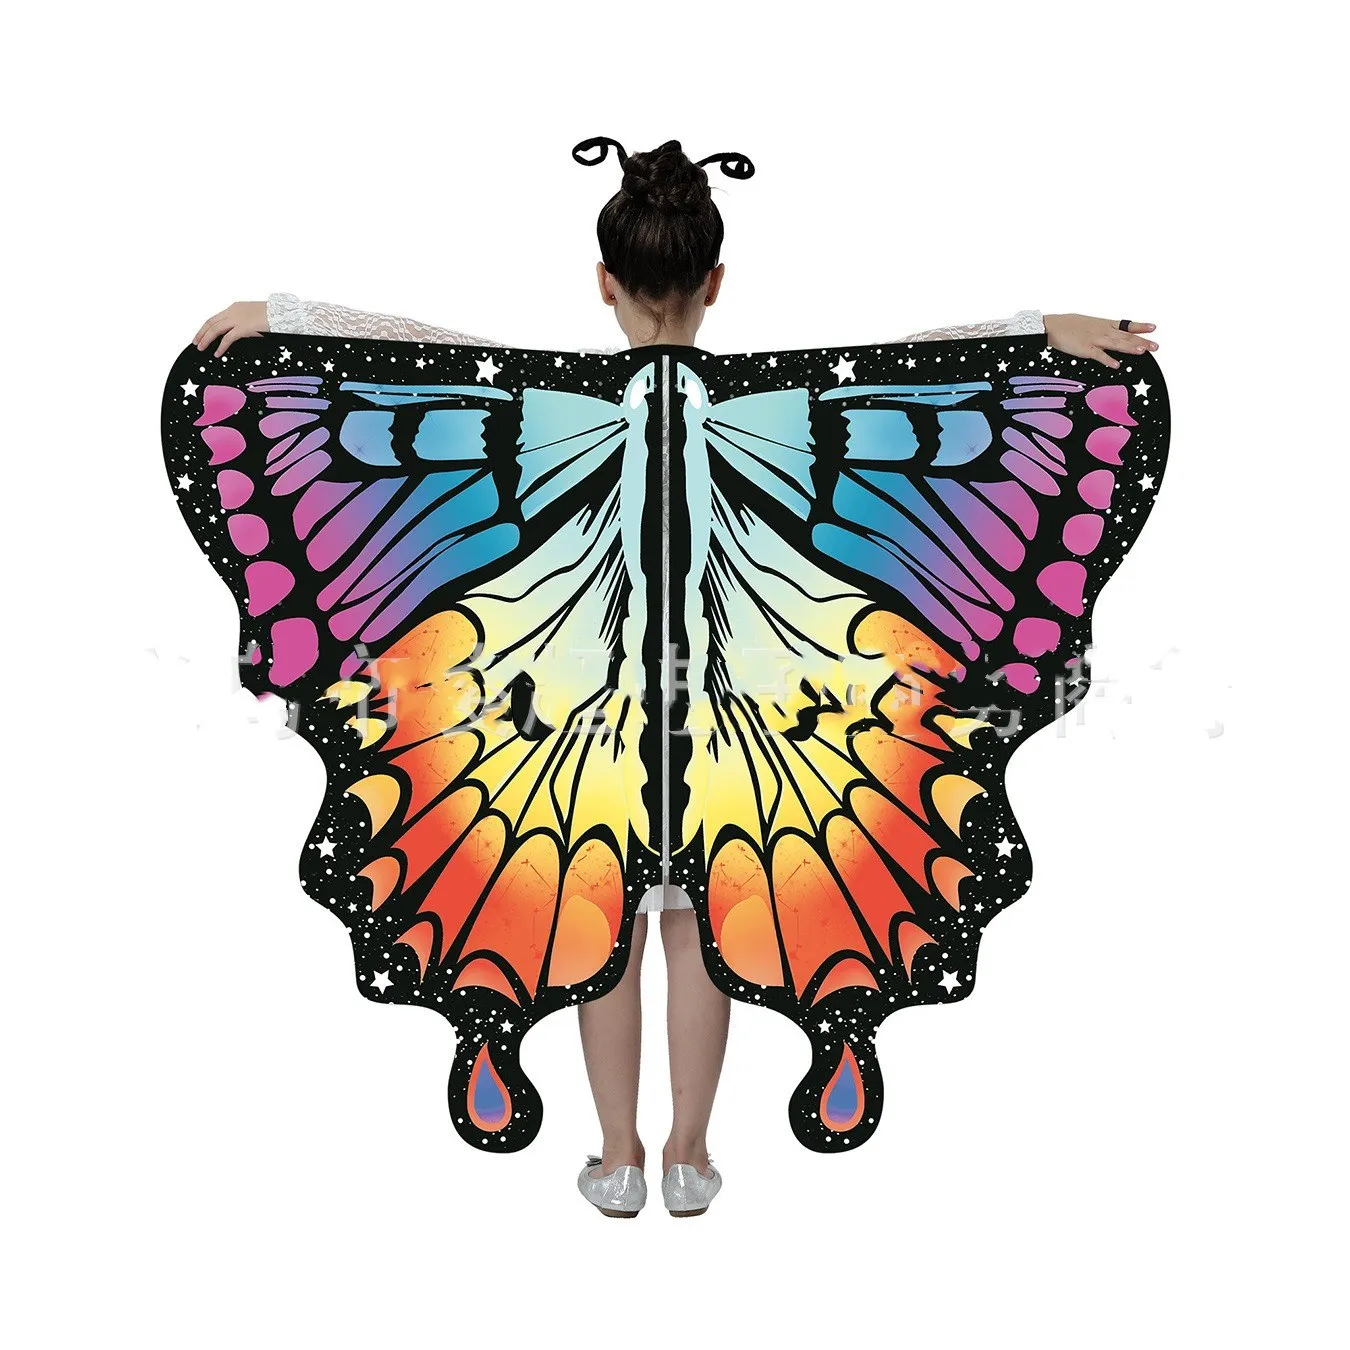 Butterfly Wings Costume Girl Fairy Dress Up Halloween Party Kids Cape Shawl Rainbow Monarch Nymph Pixie Scarf Stage Show New